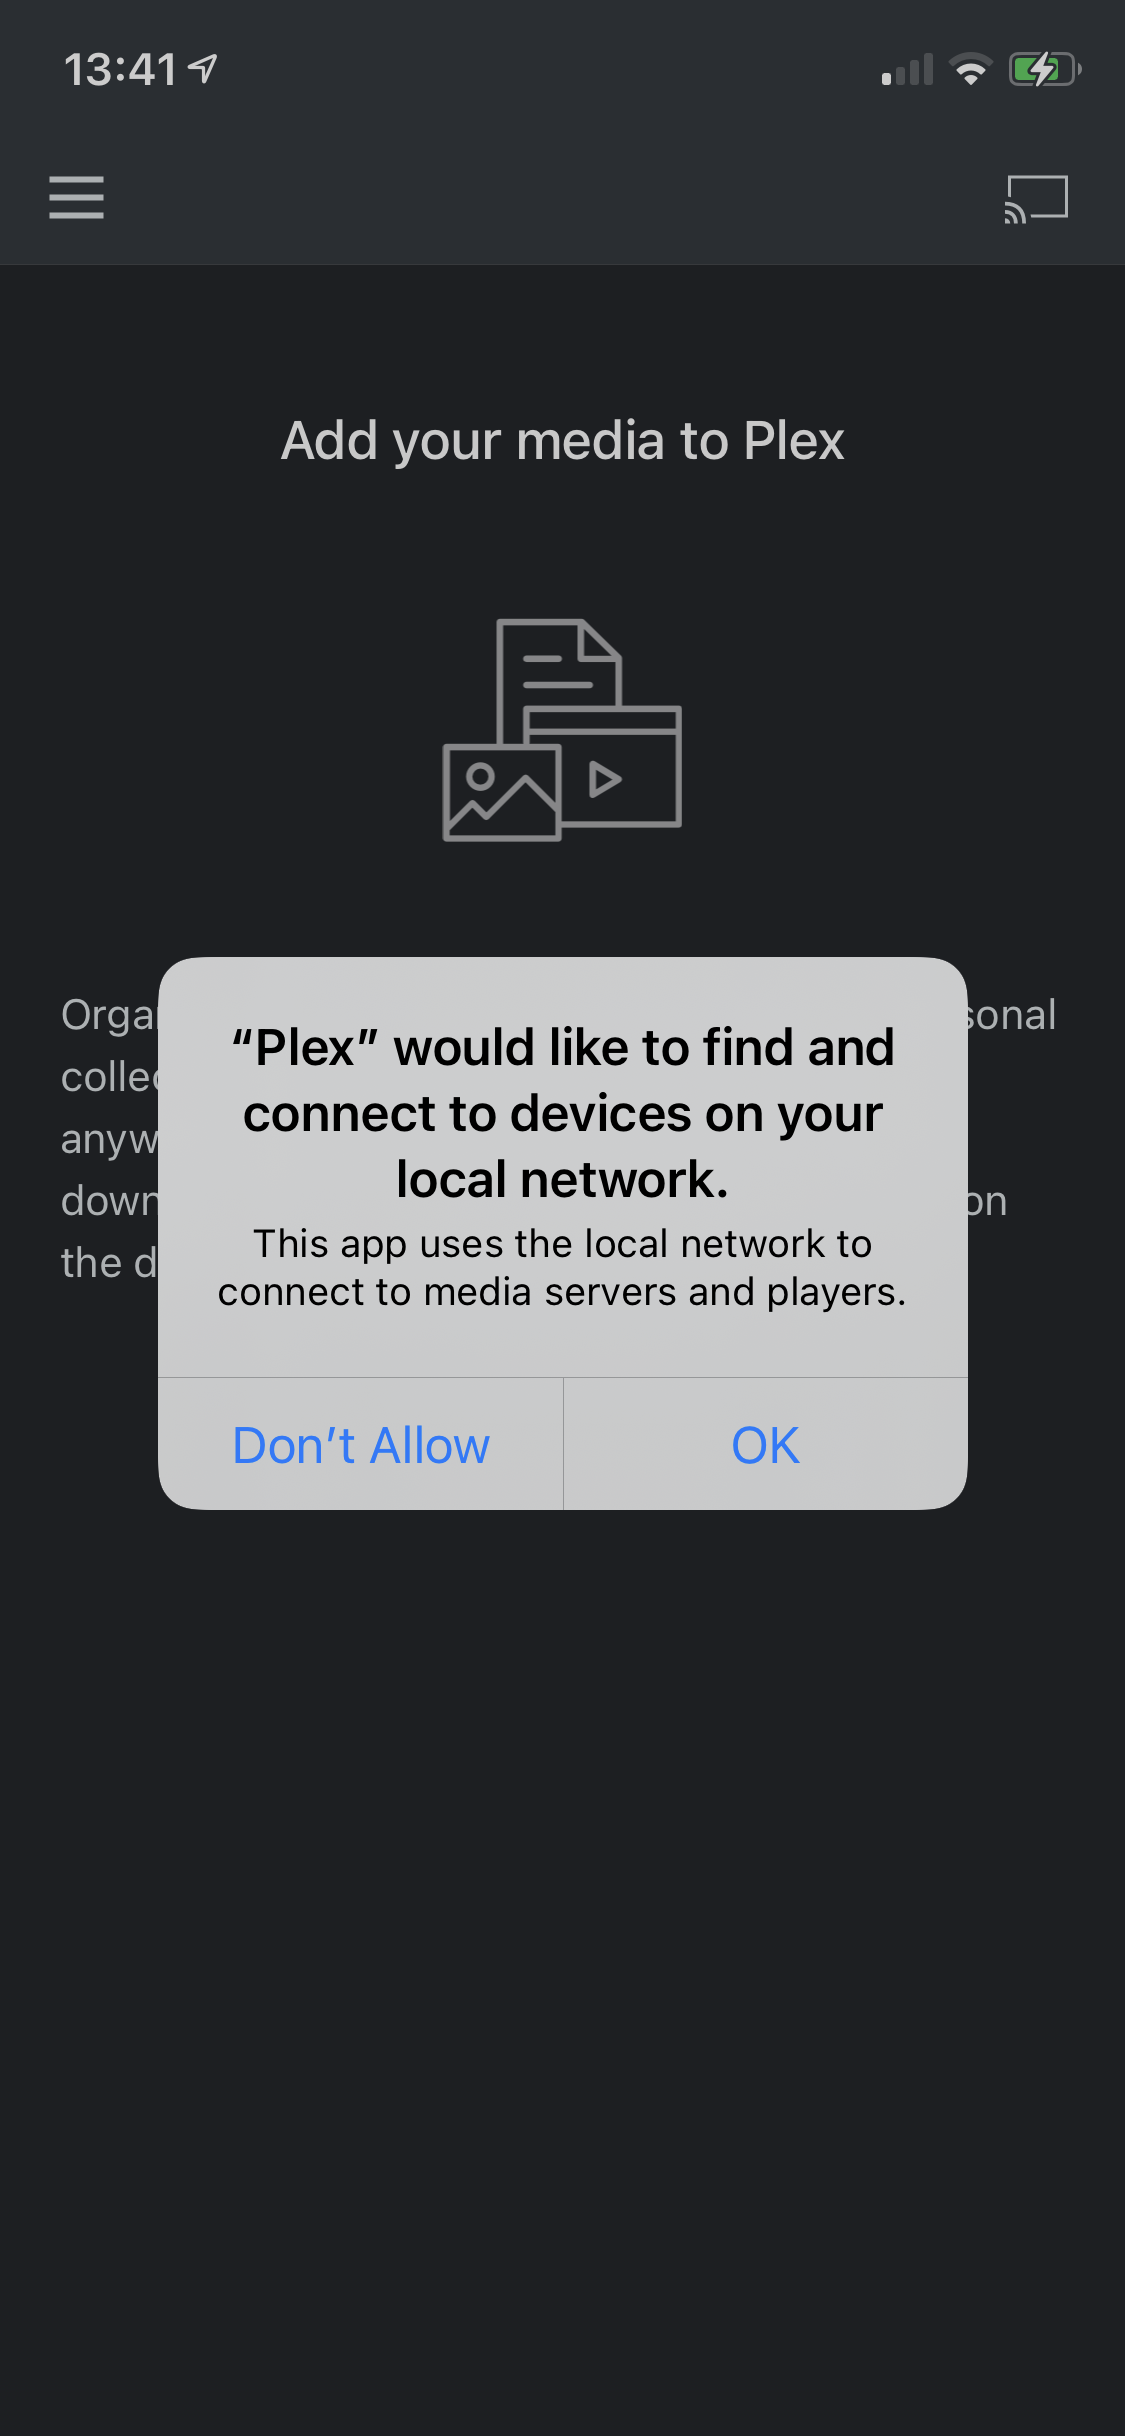 A permission prompt in iOS 14 to allow local network access with the Plex app